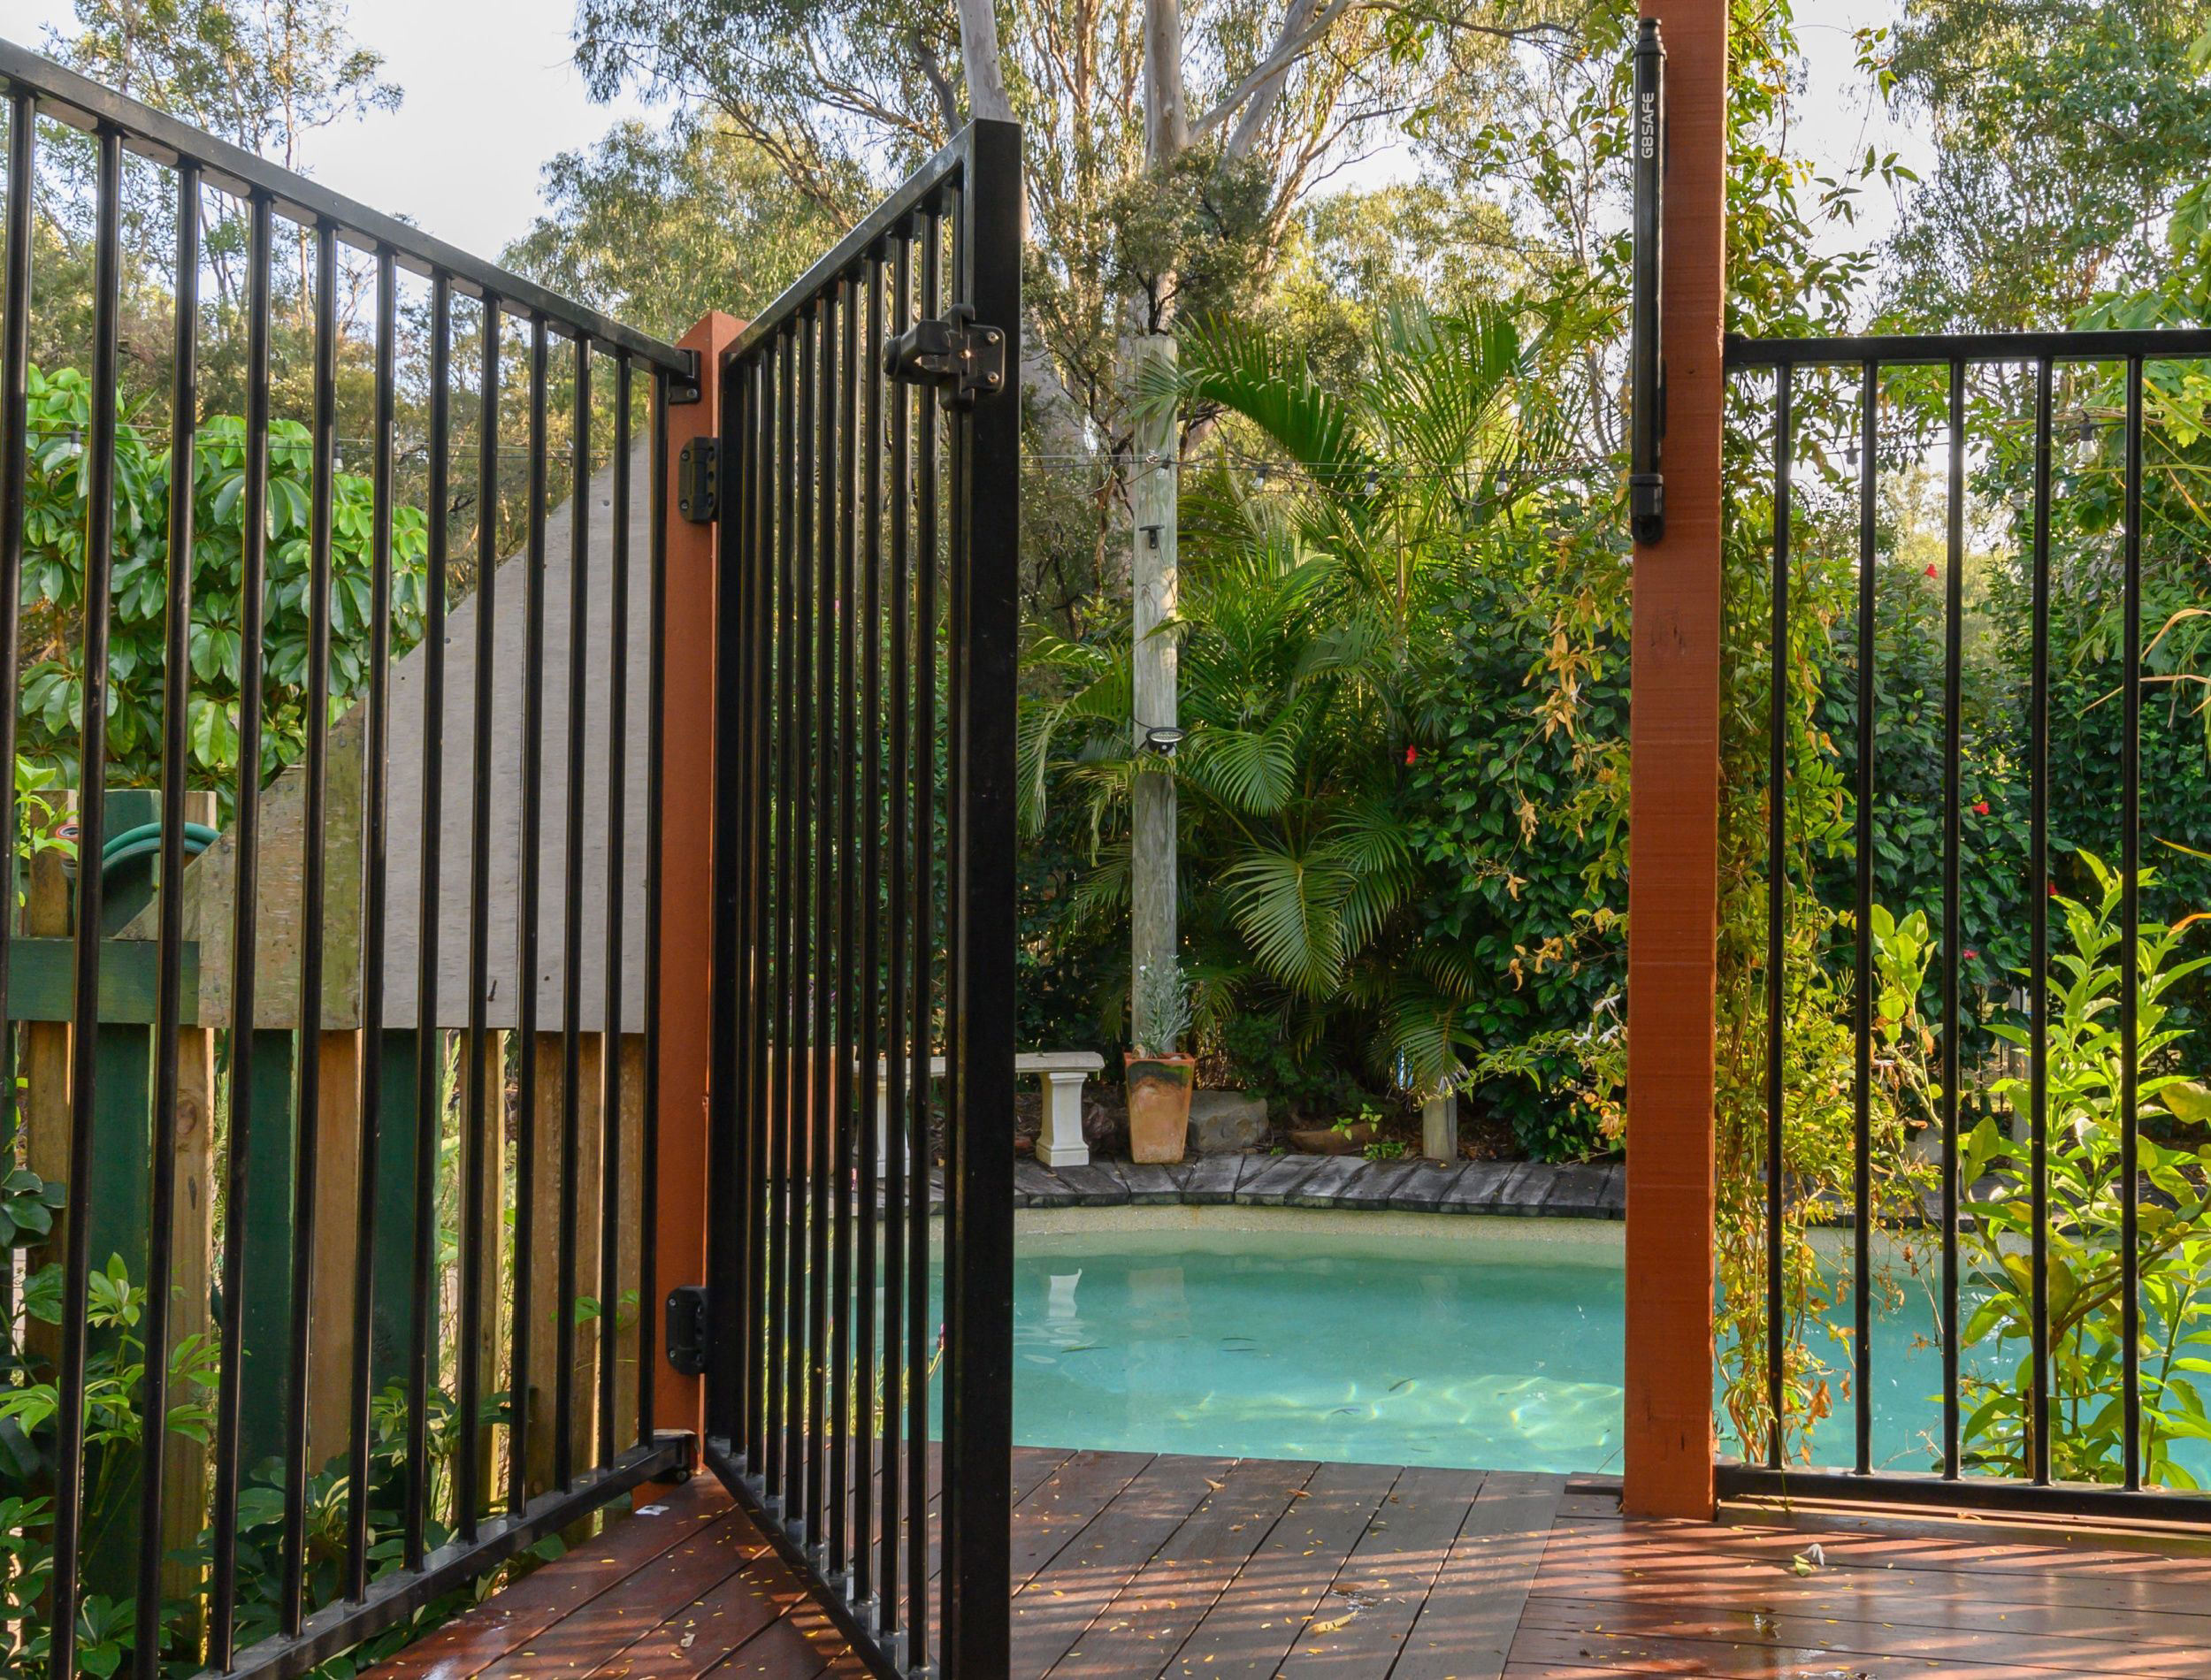 10 Pool Fence Ideas to Update Your Backyard